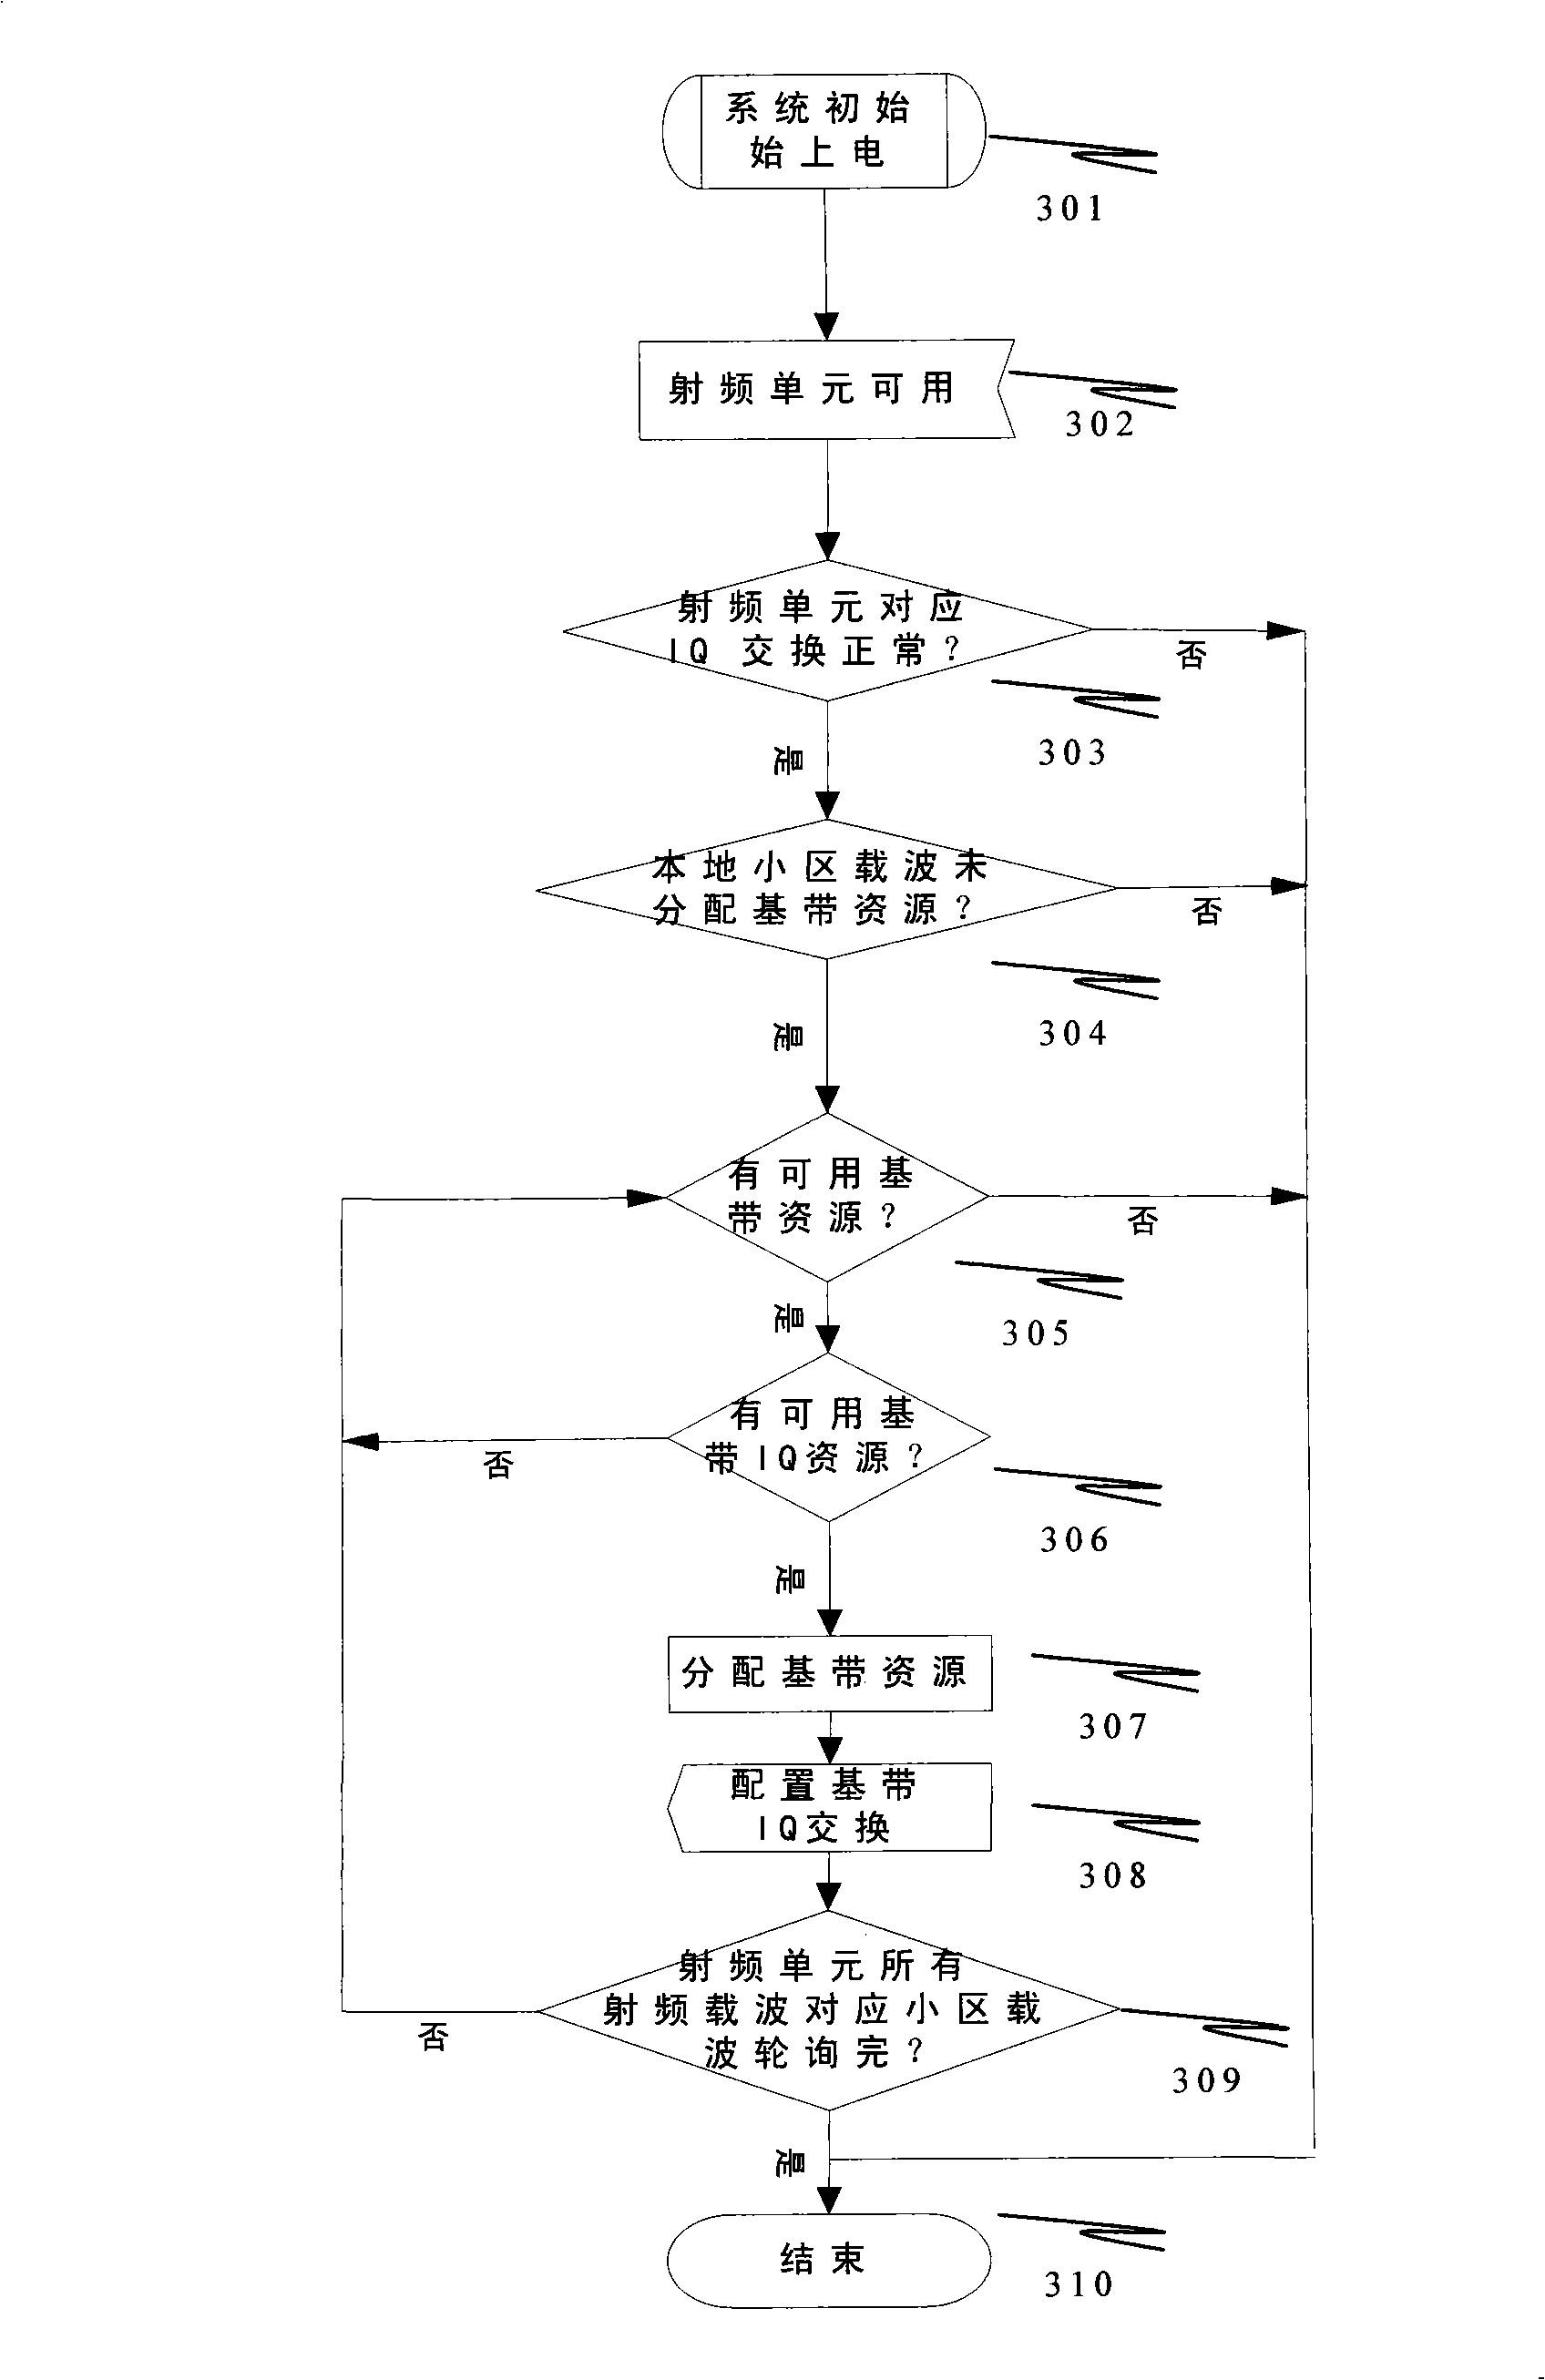 Base-band resource distributing method in wireless system